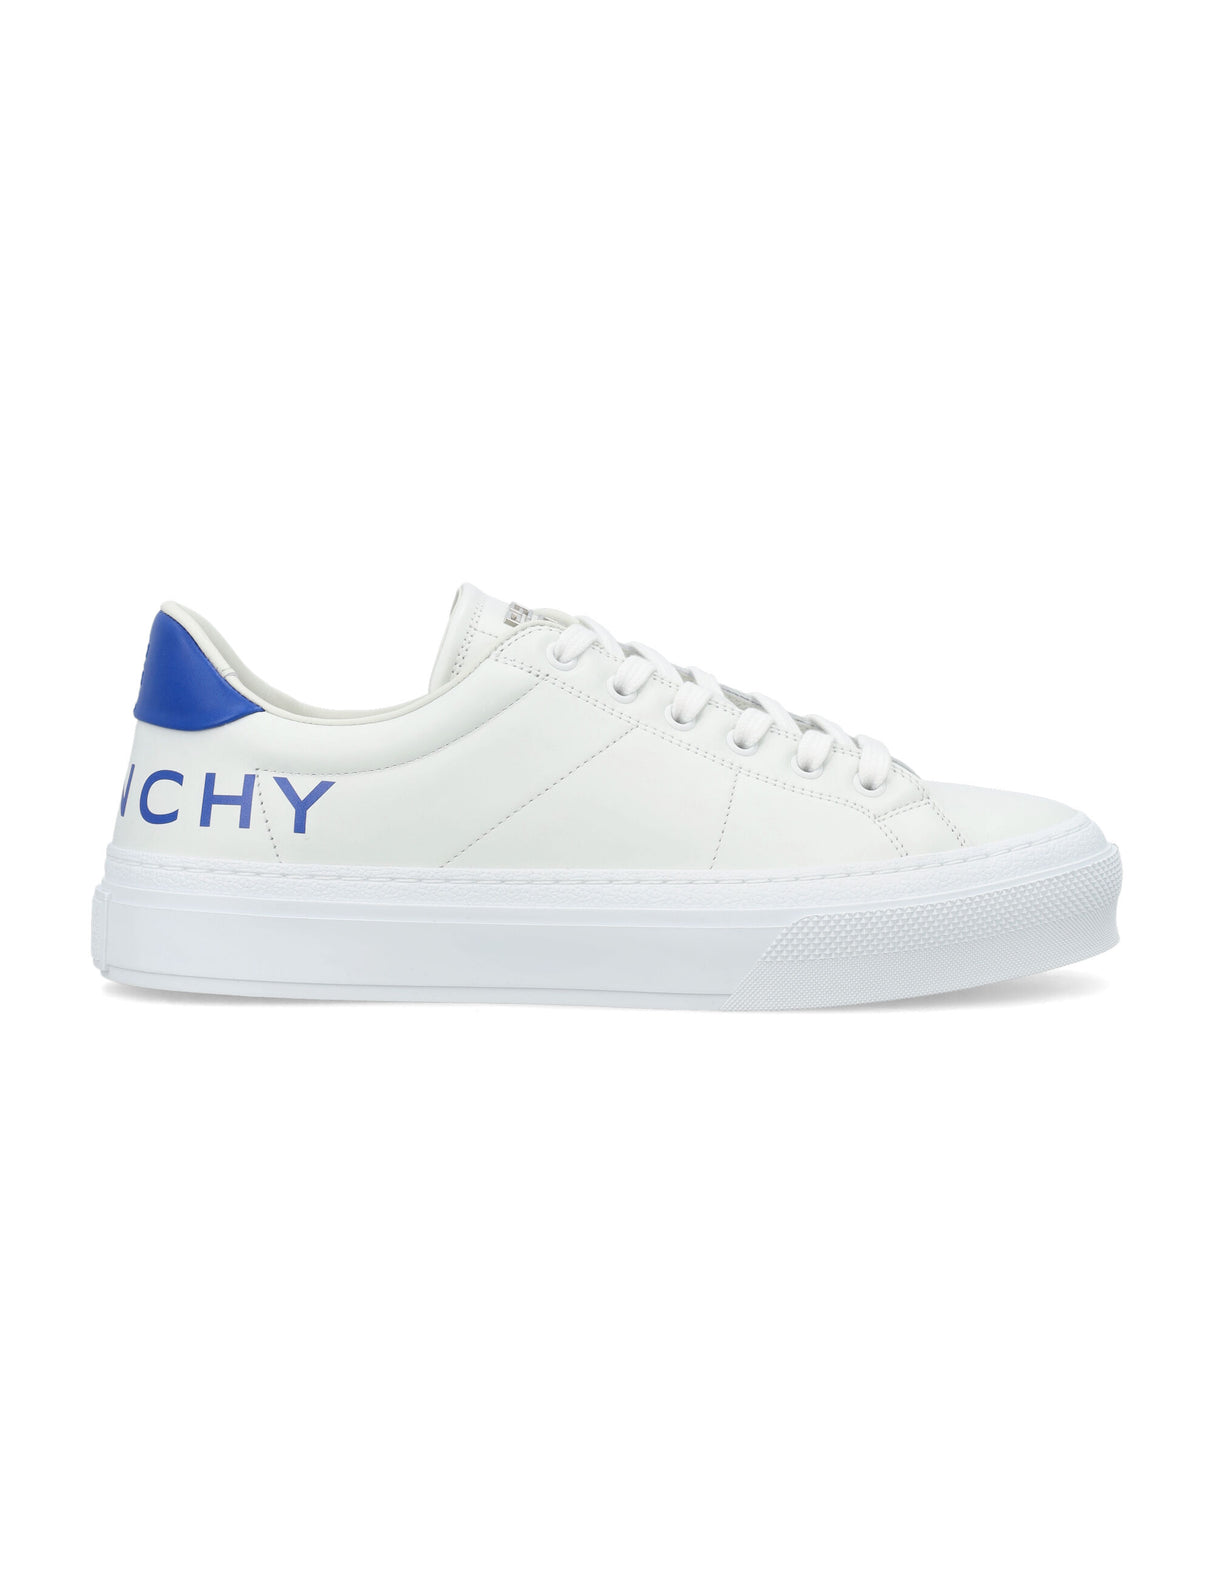 Men's White and Blue Leather Sneakers for SS24 | Low Top, Lace-Up Fastening, GIVENCHY Signature Details